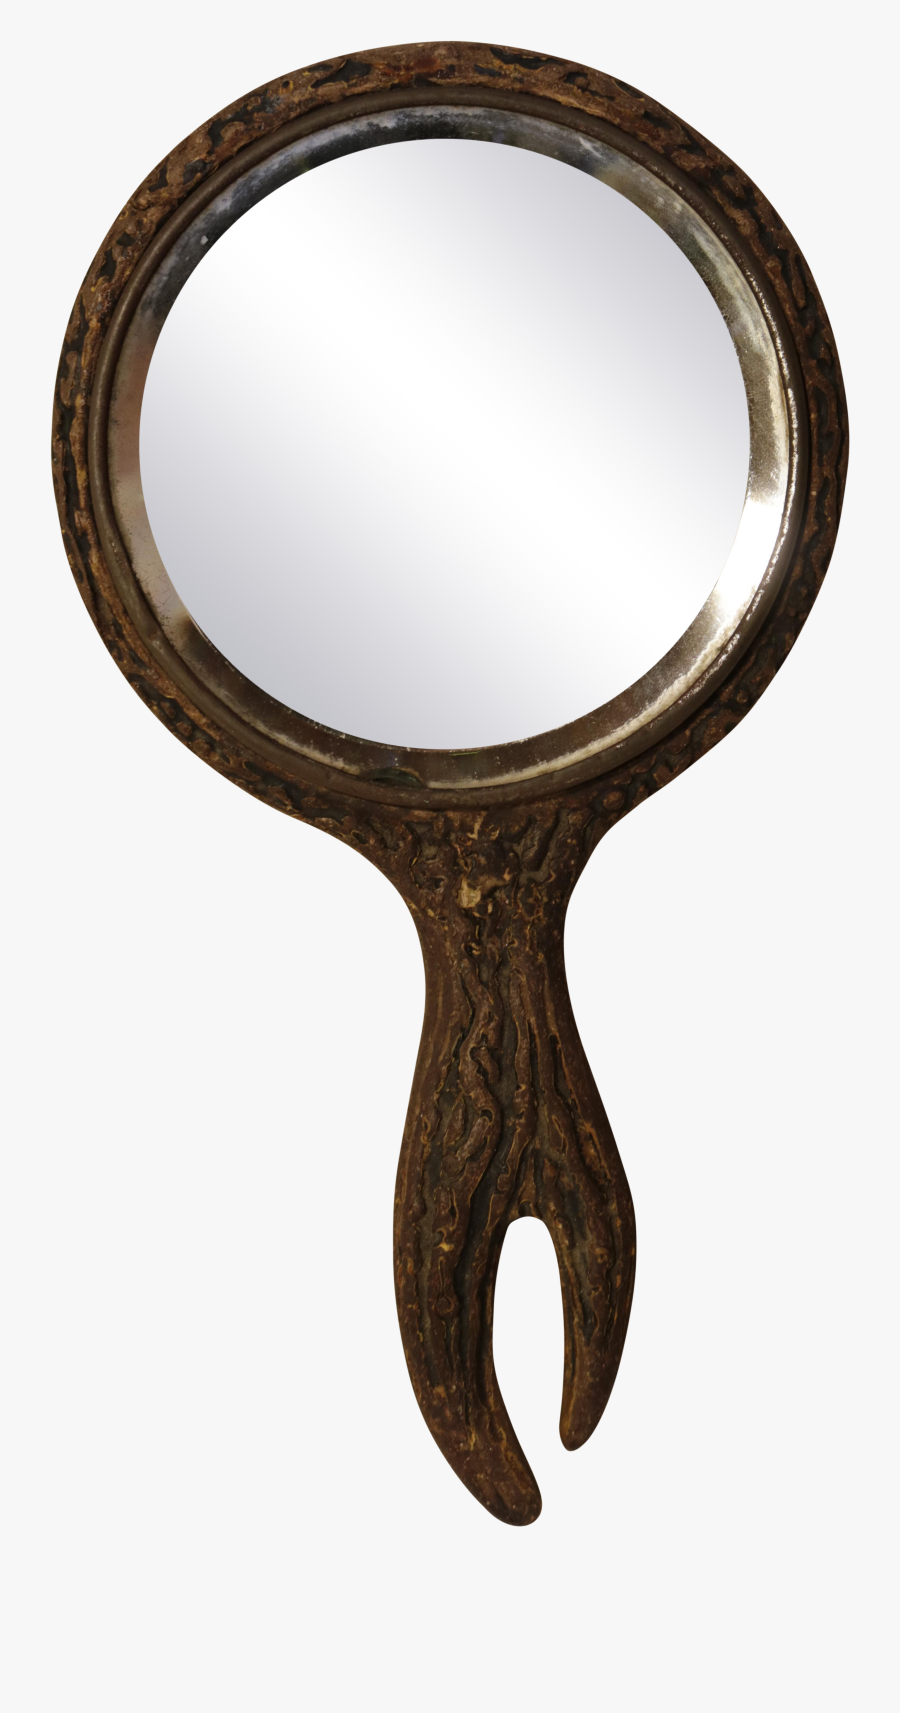 Hand Held Mirror Png - Old Hand Held Mirror Png, Transparent Clipart